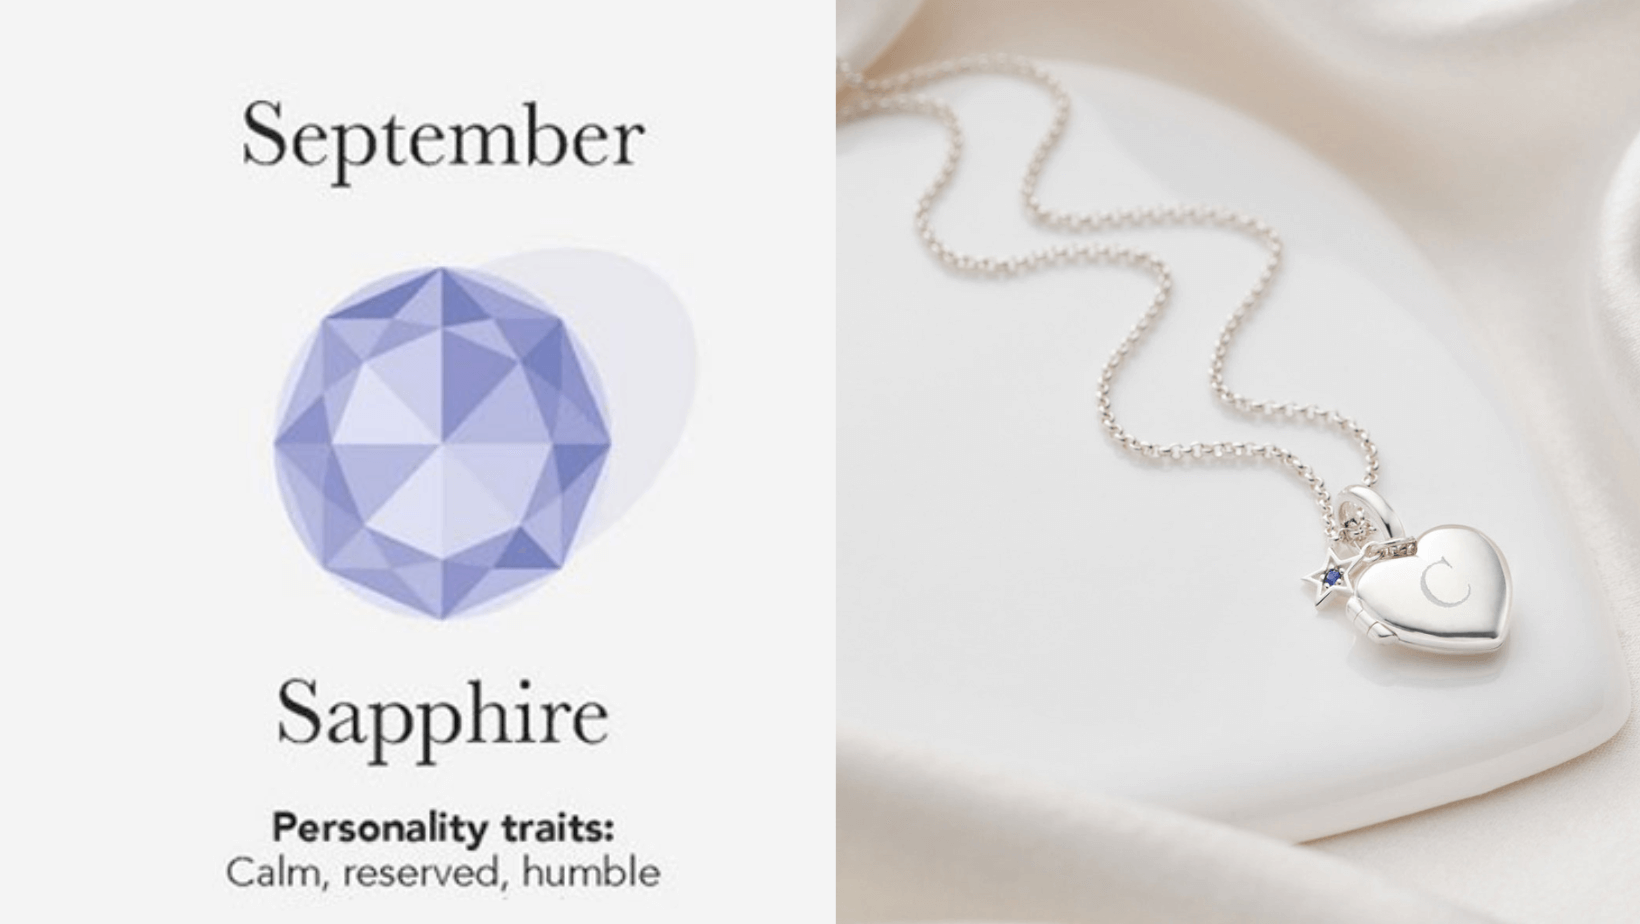 What is September's birthstone